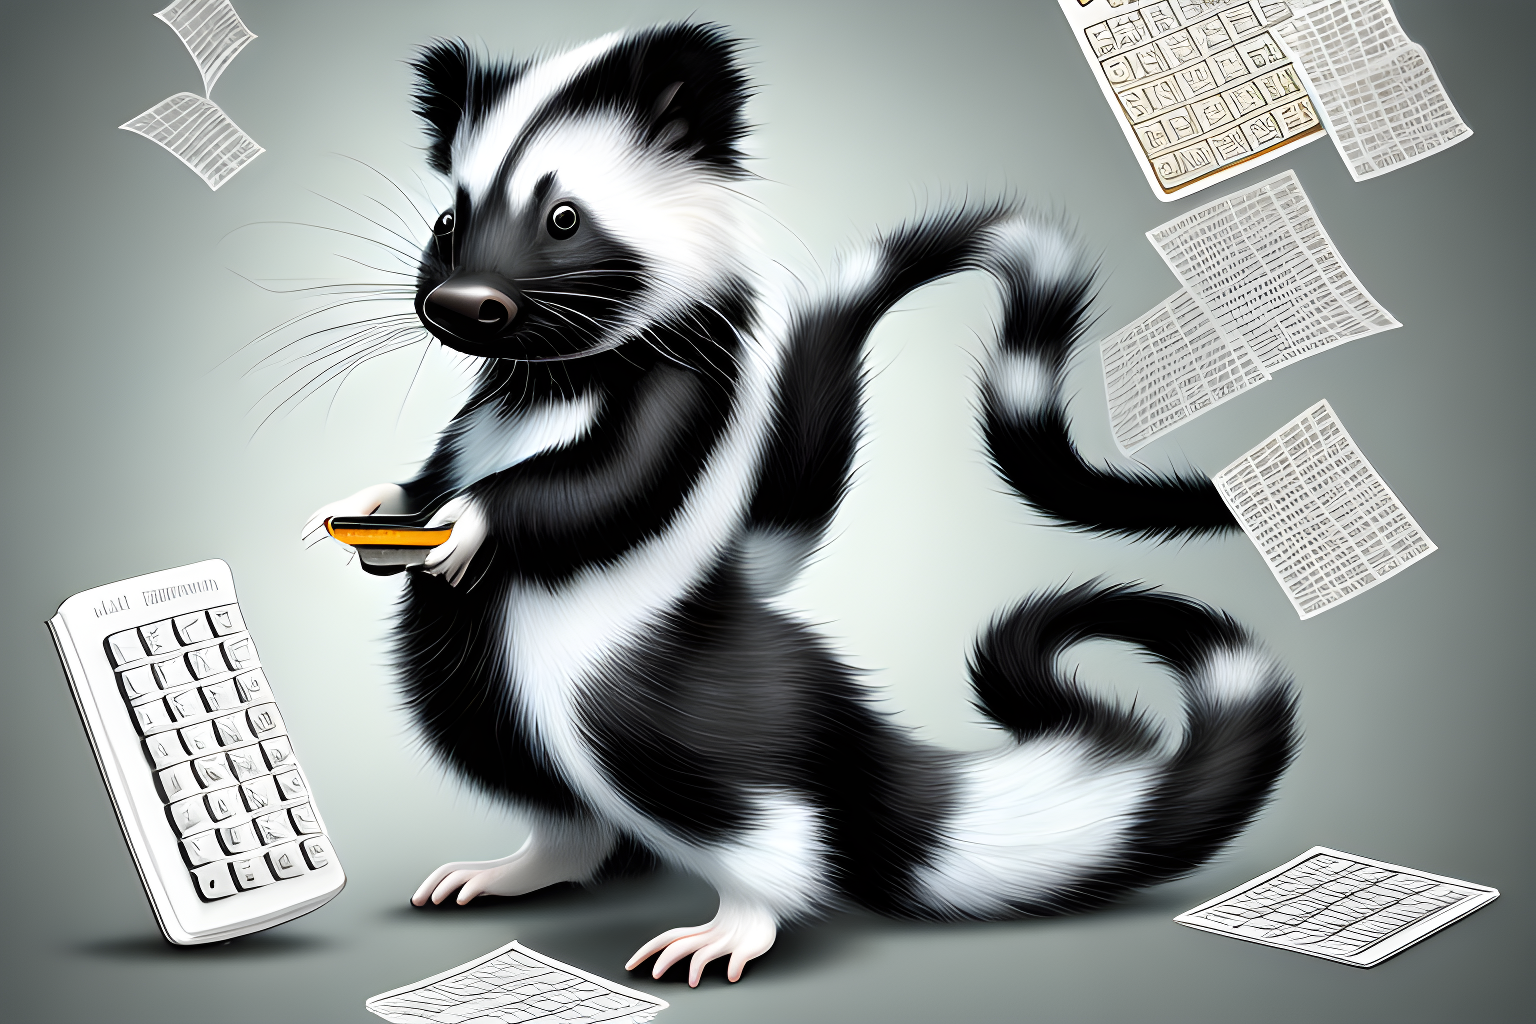 mdjrny-v4 style a skunk with a calculator and a stinky tail